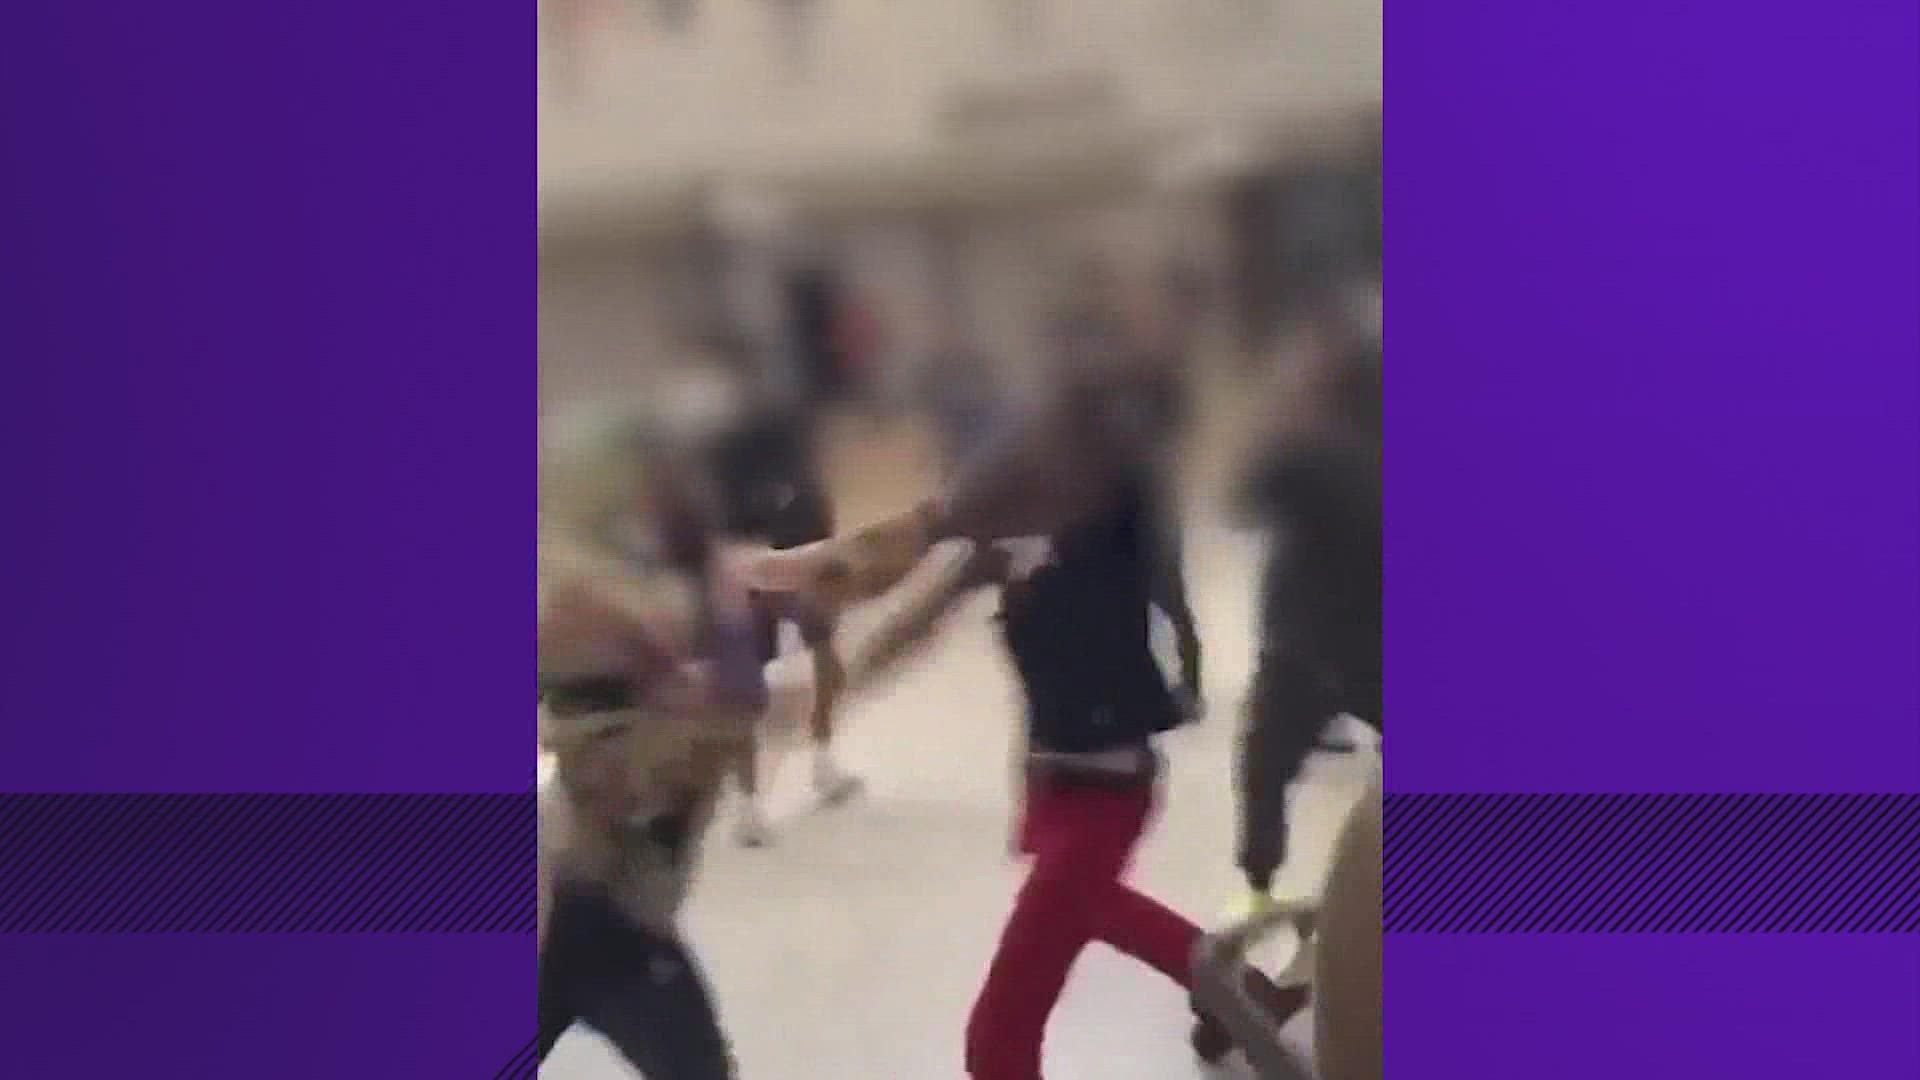 KHOU 11 Investigates is taking a close look at the number of fights at schools in the Houston area.